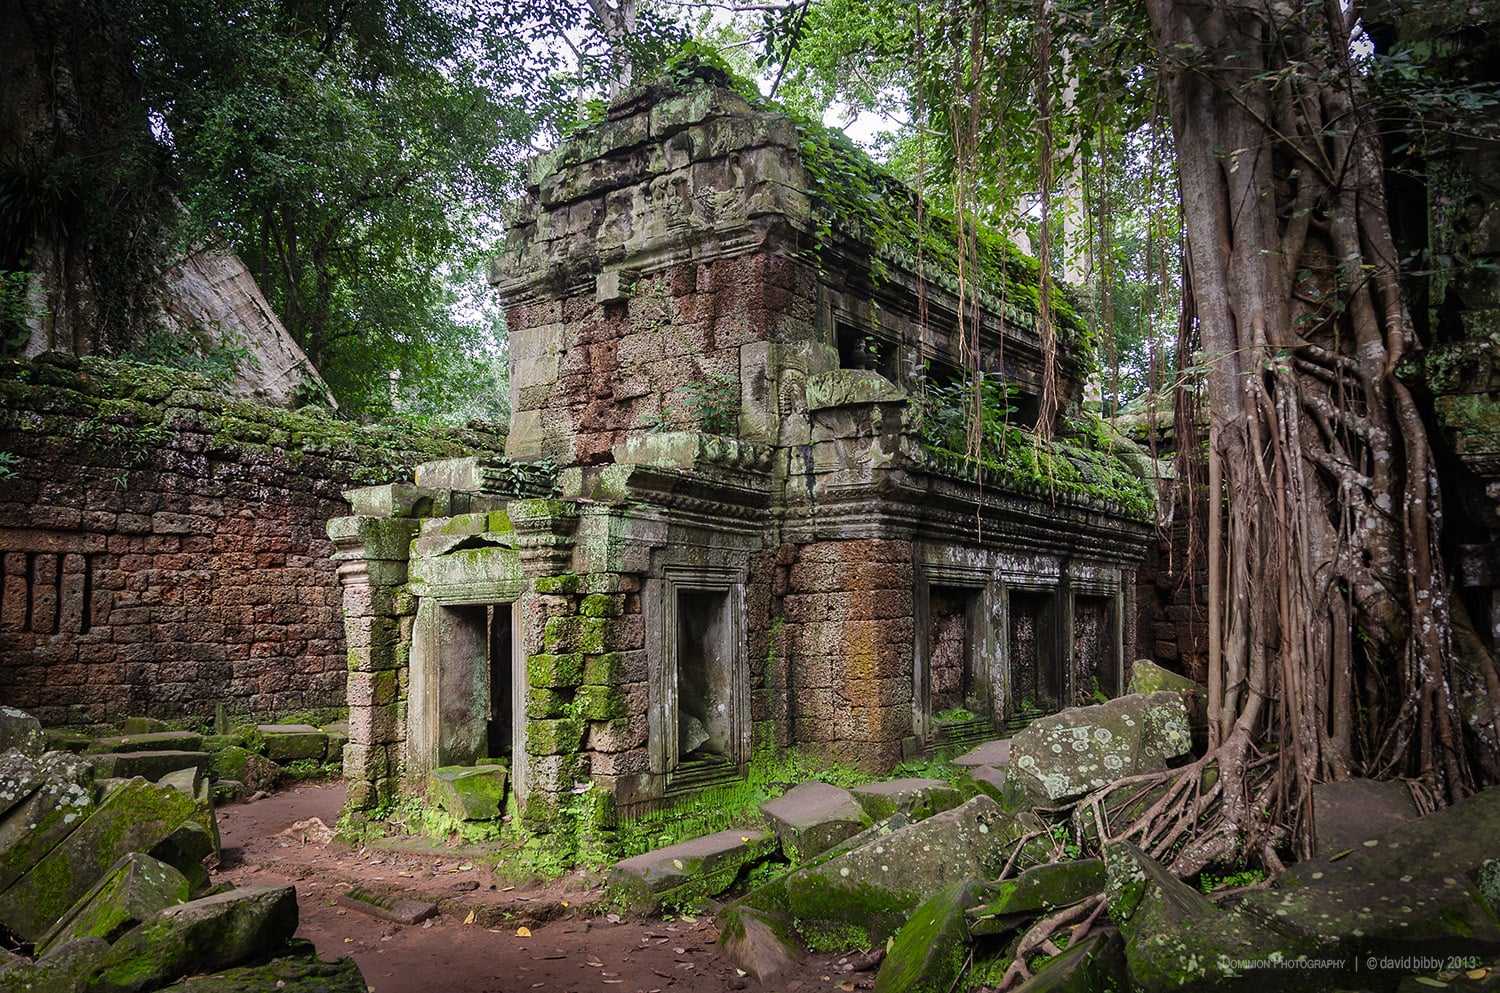   Ta Prohm  - In the ruins. The Ta Prohm temple complex was built in the 12th-13th centuries. Siem Reap Province, Cambodia. 